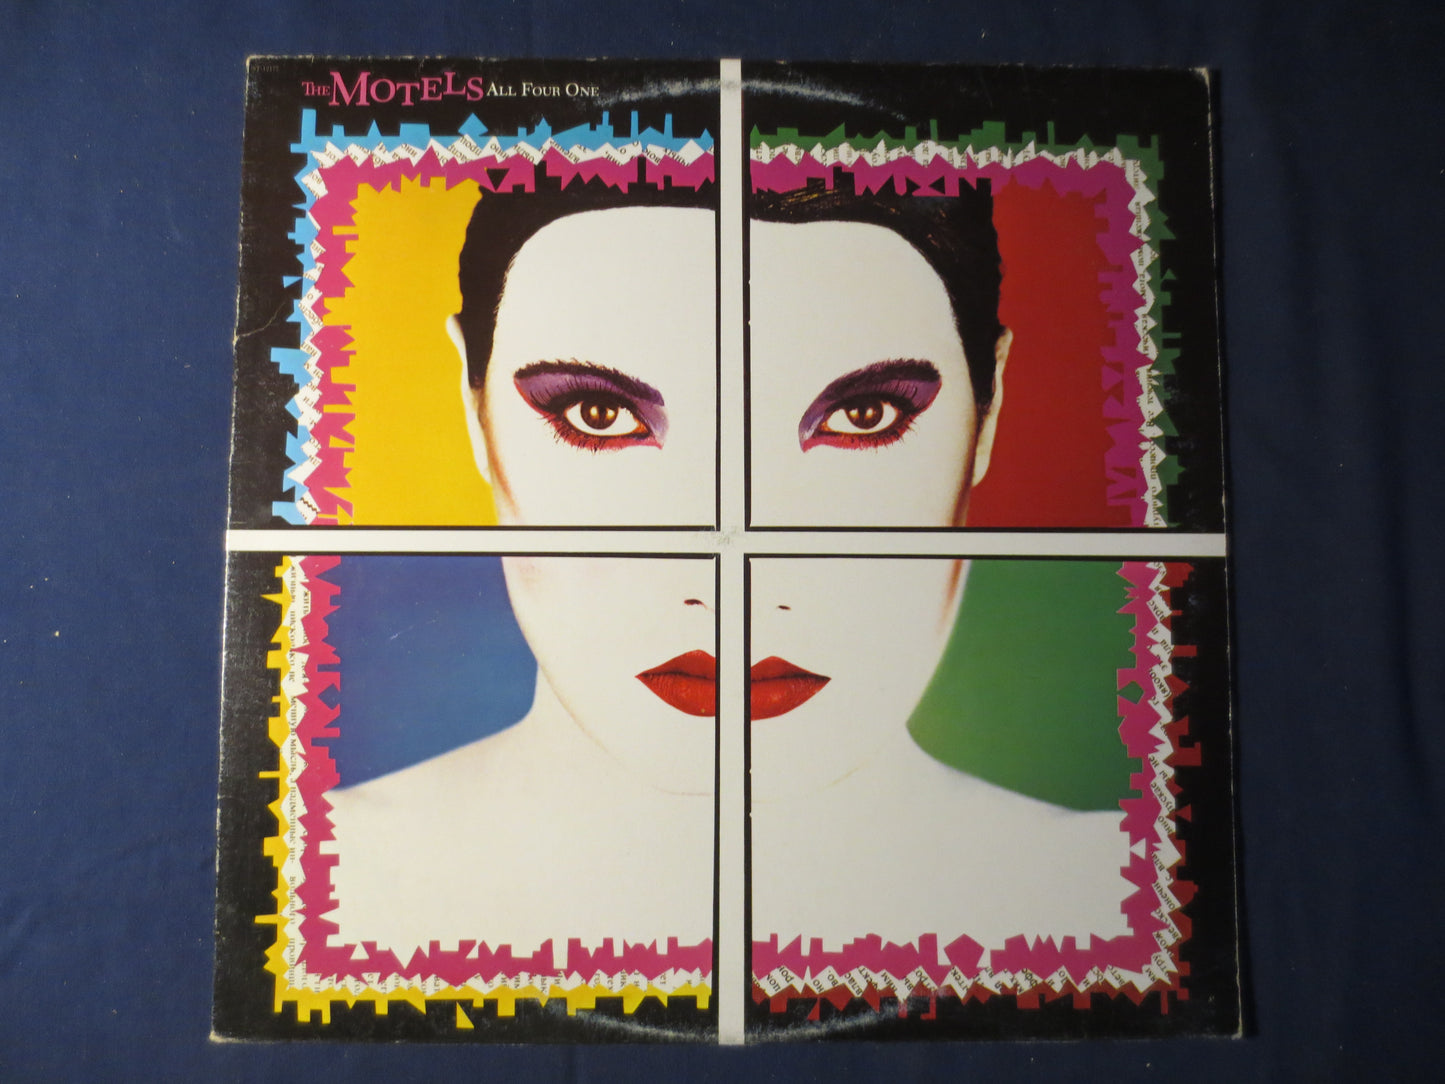 The MOTELS, All FOUR ONE, The Motels Album, The Motels Vinyl, The Motels Lp, Vintage Vinyl, Records, 1982 Records